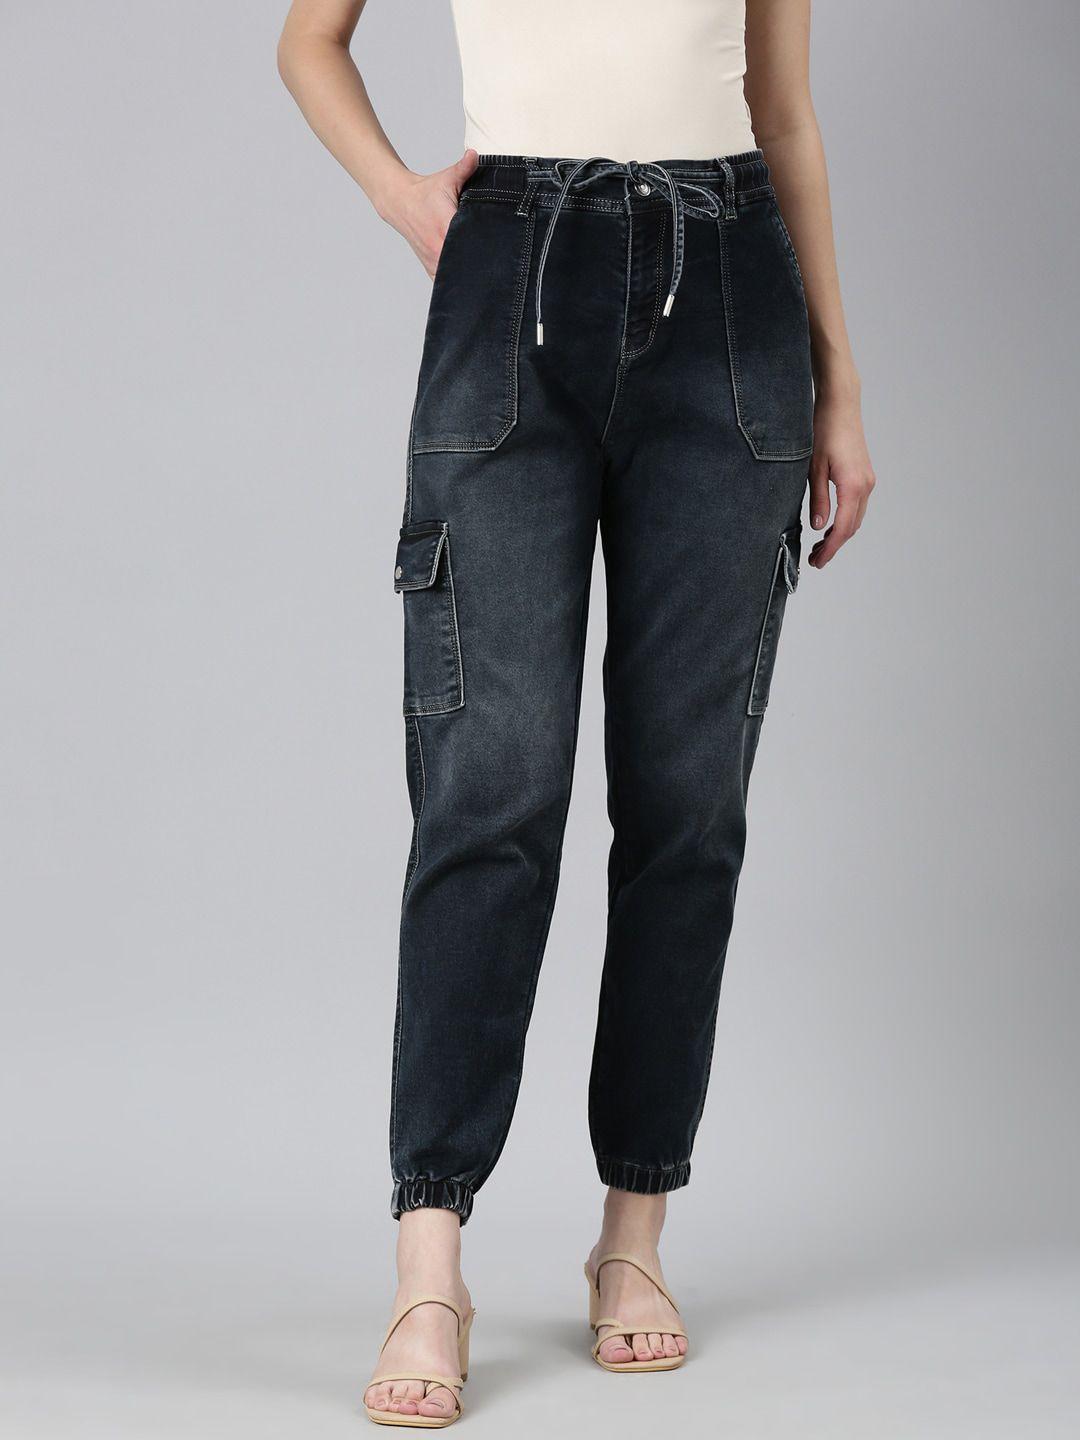 showoff-women-jean-jogger-clean-look-light-fade-cuffed-hem-stretchable-jeans